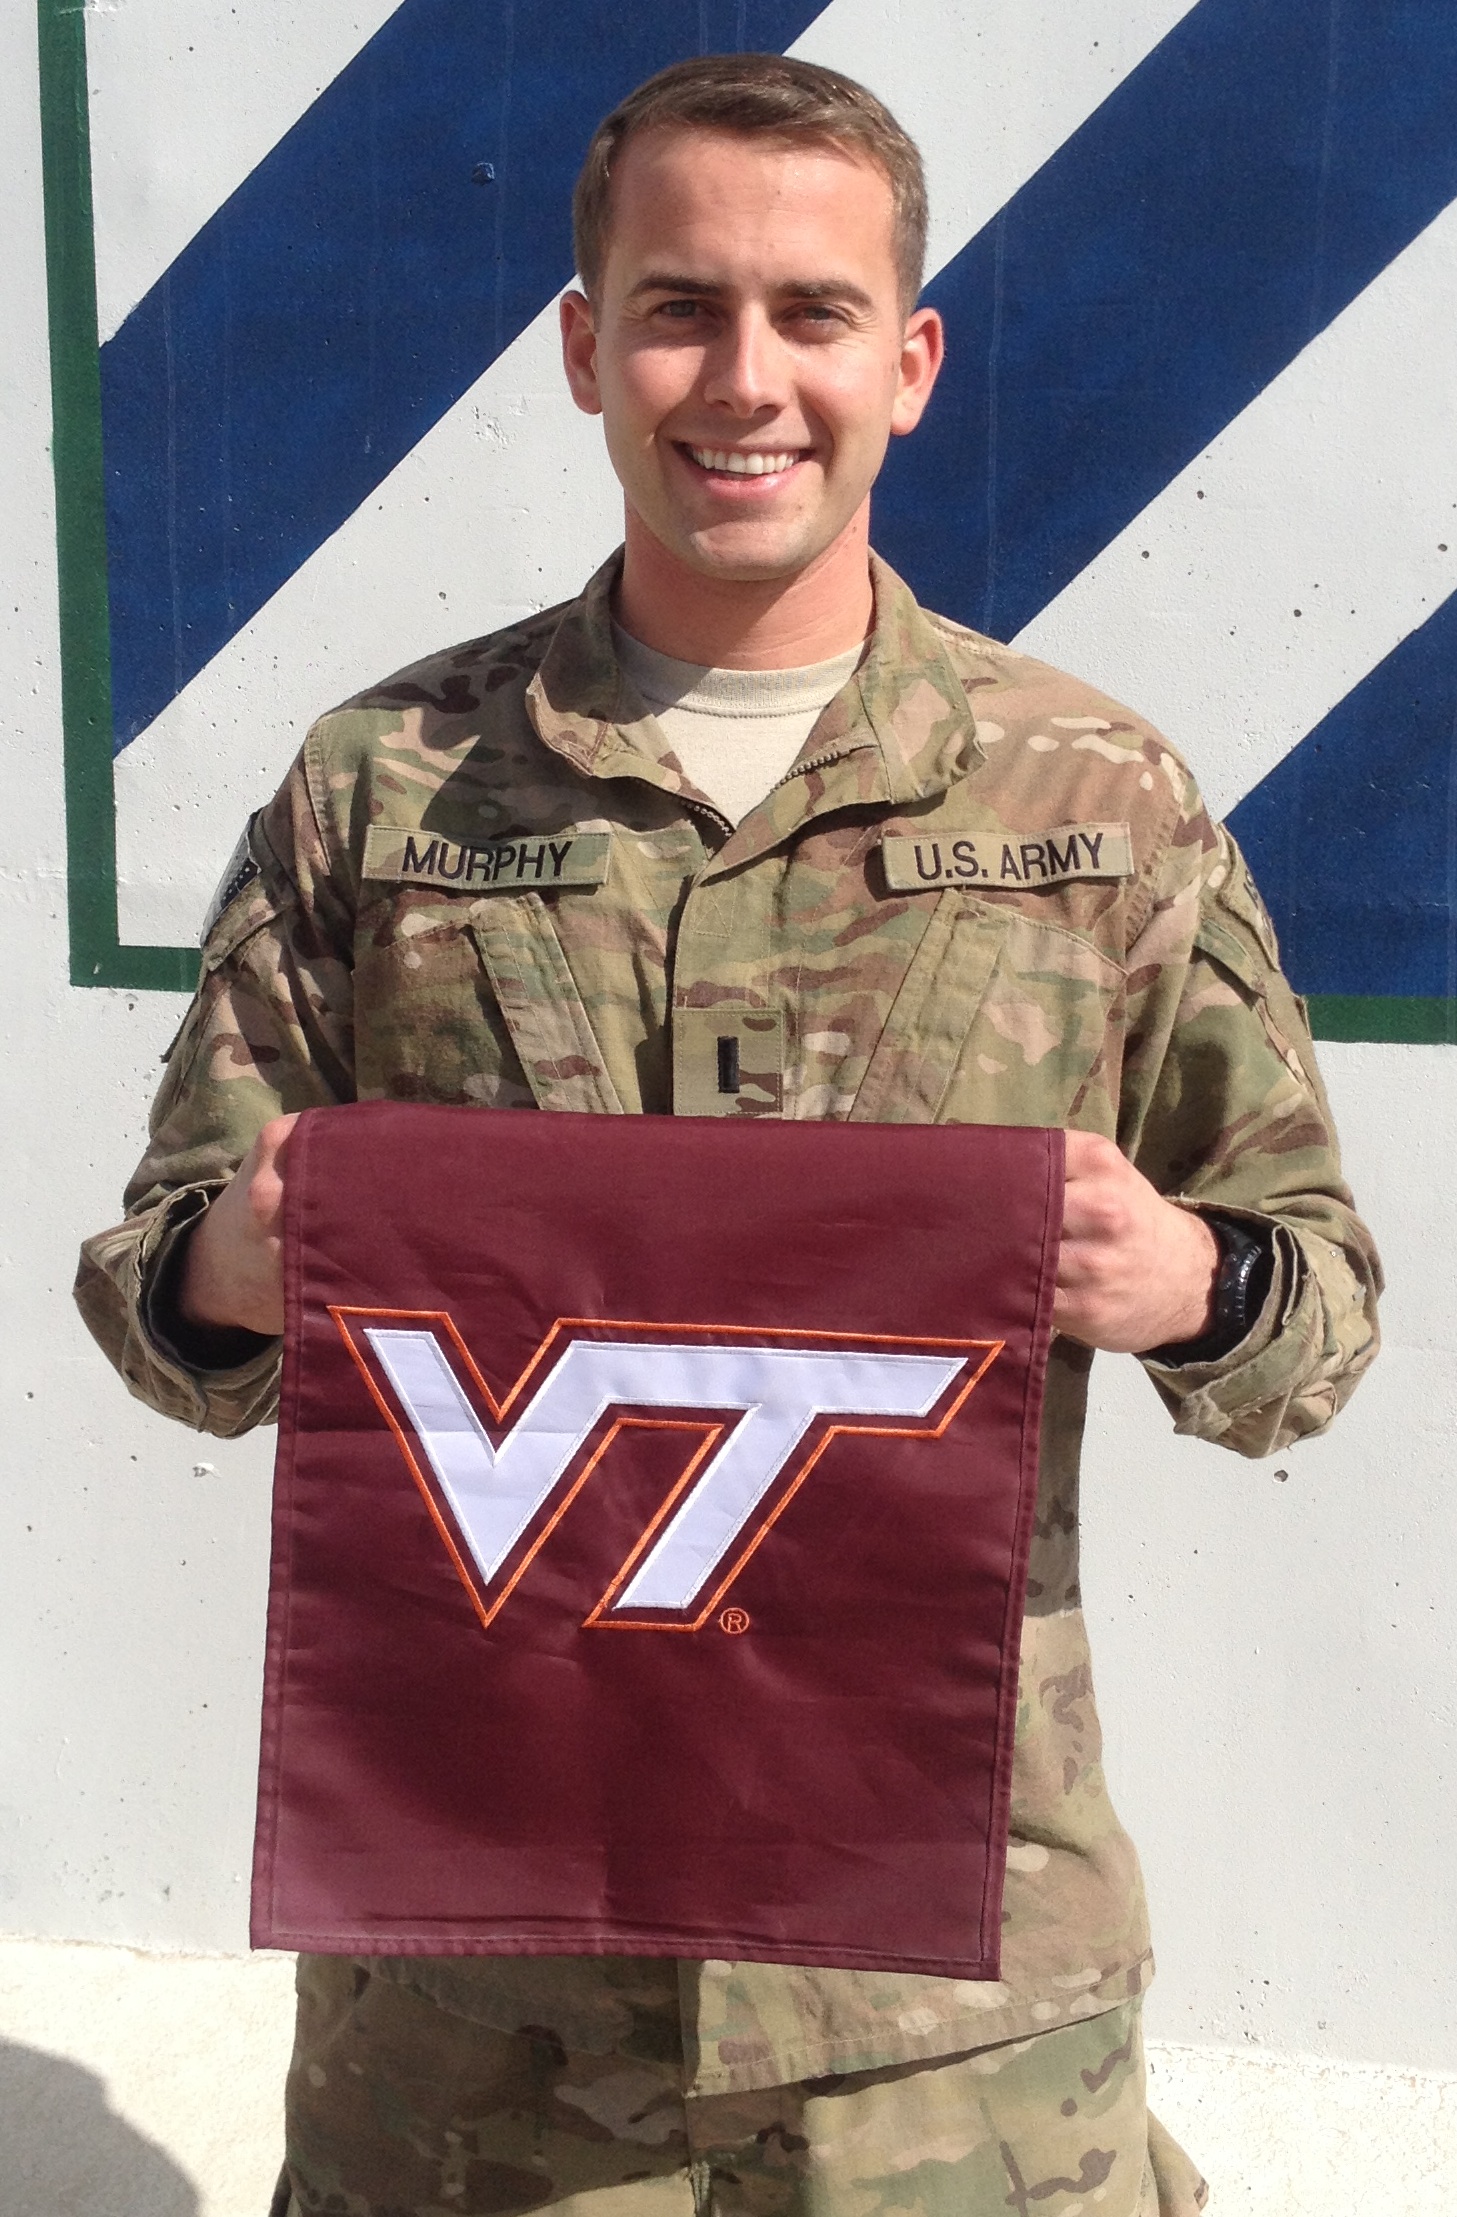 1st Lt. Ryan Murphy, U.S. Army, Virginia Tech Corps of Cadets Class of 2010 from his deployed location in Afghanistan.